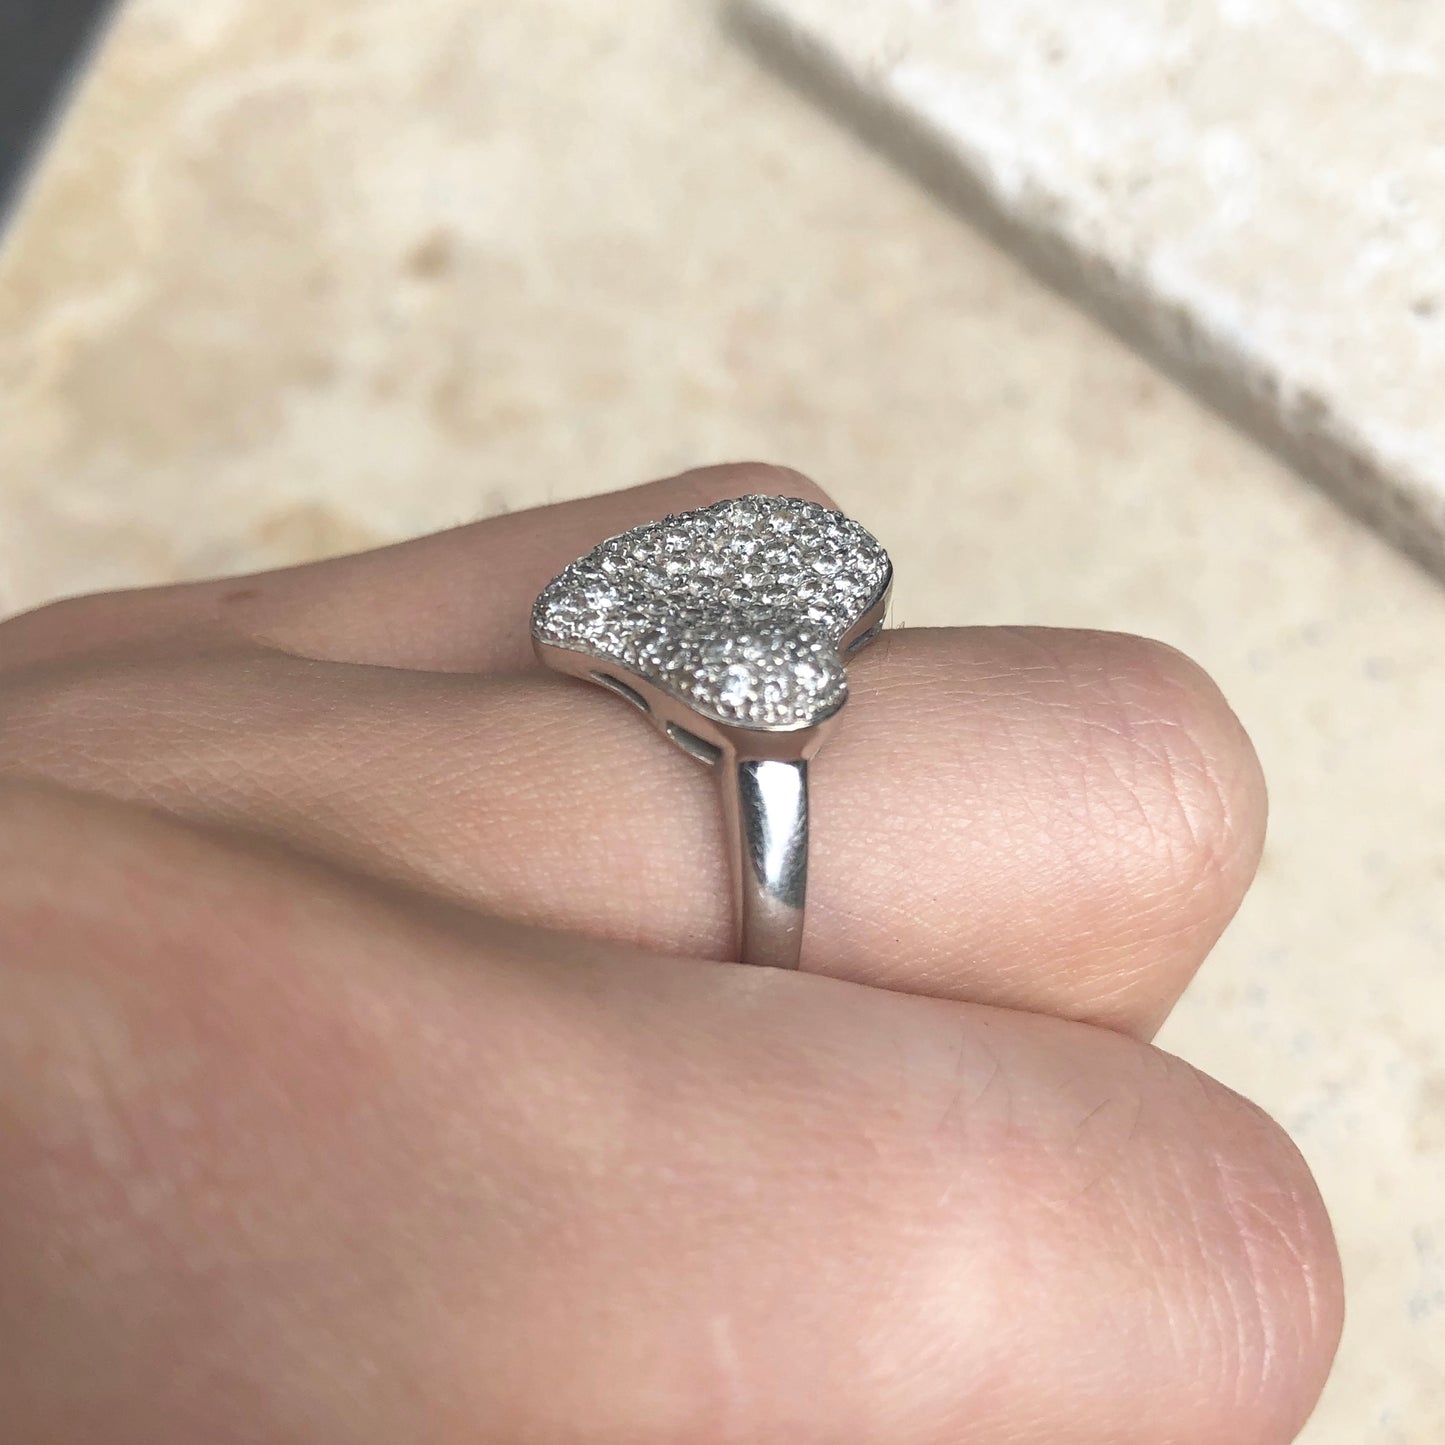 Estate 18KT White Gold Pave Diamond Abstract Heart Ring Size 6.75, Estate 18KT White Gold Pave Diamond Abstract Heart Ring Size 6.75 - Legacy Saint Jewelry